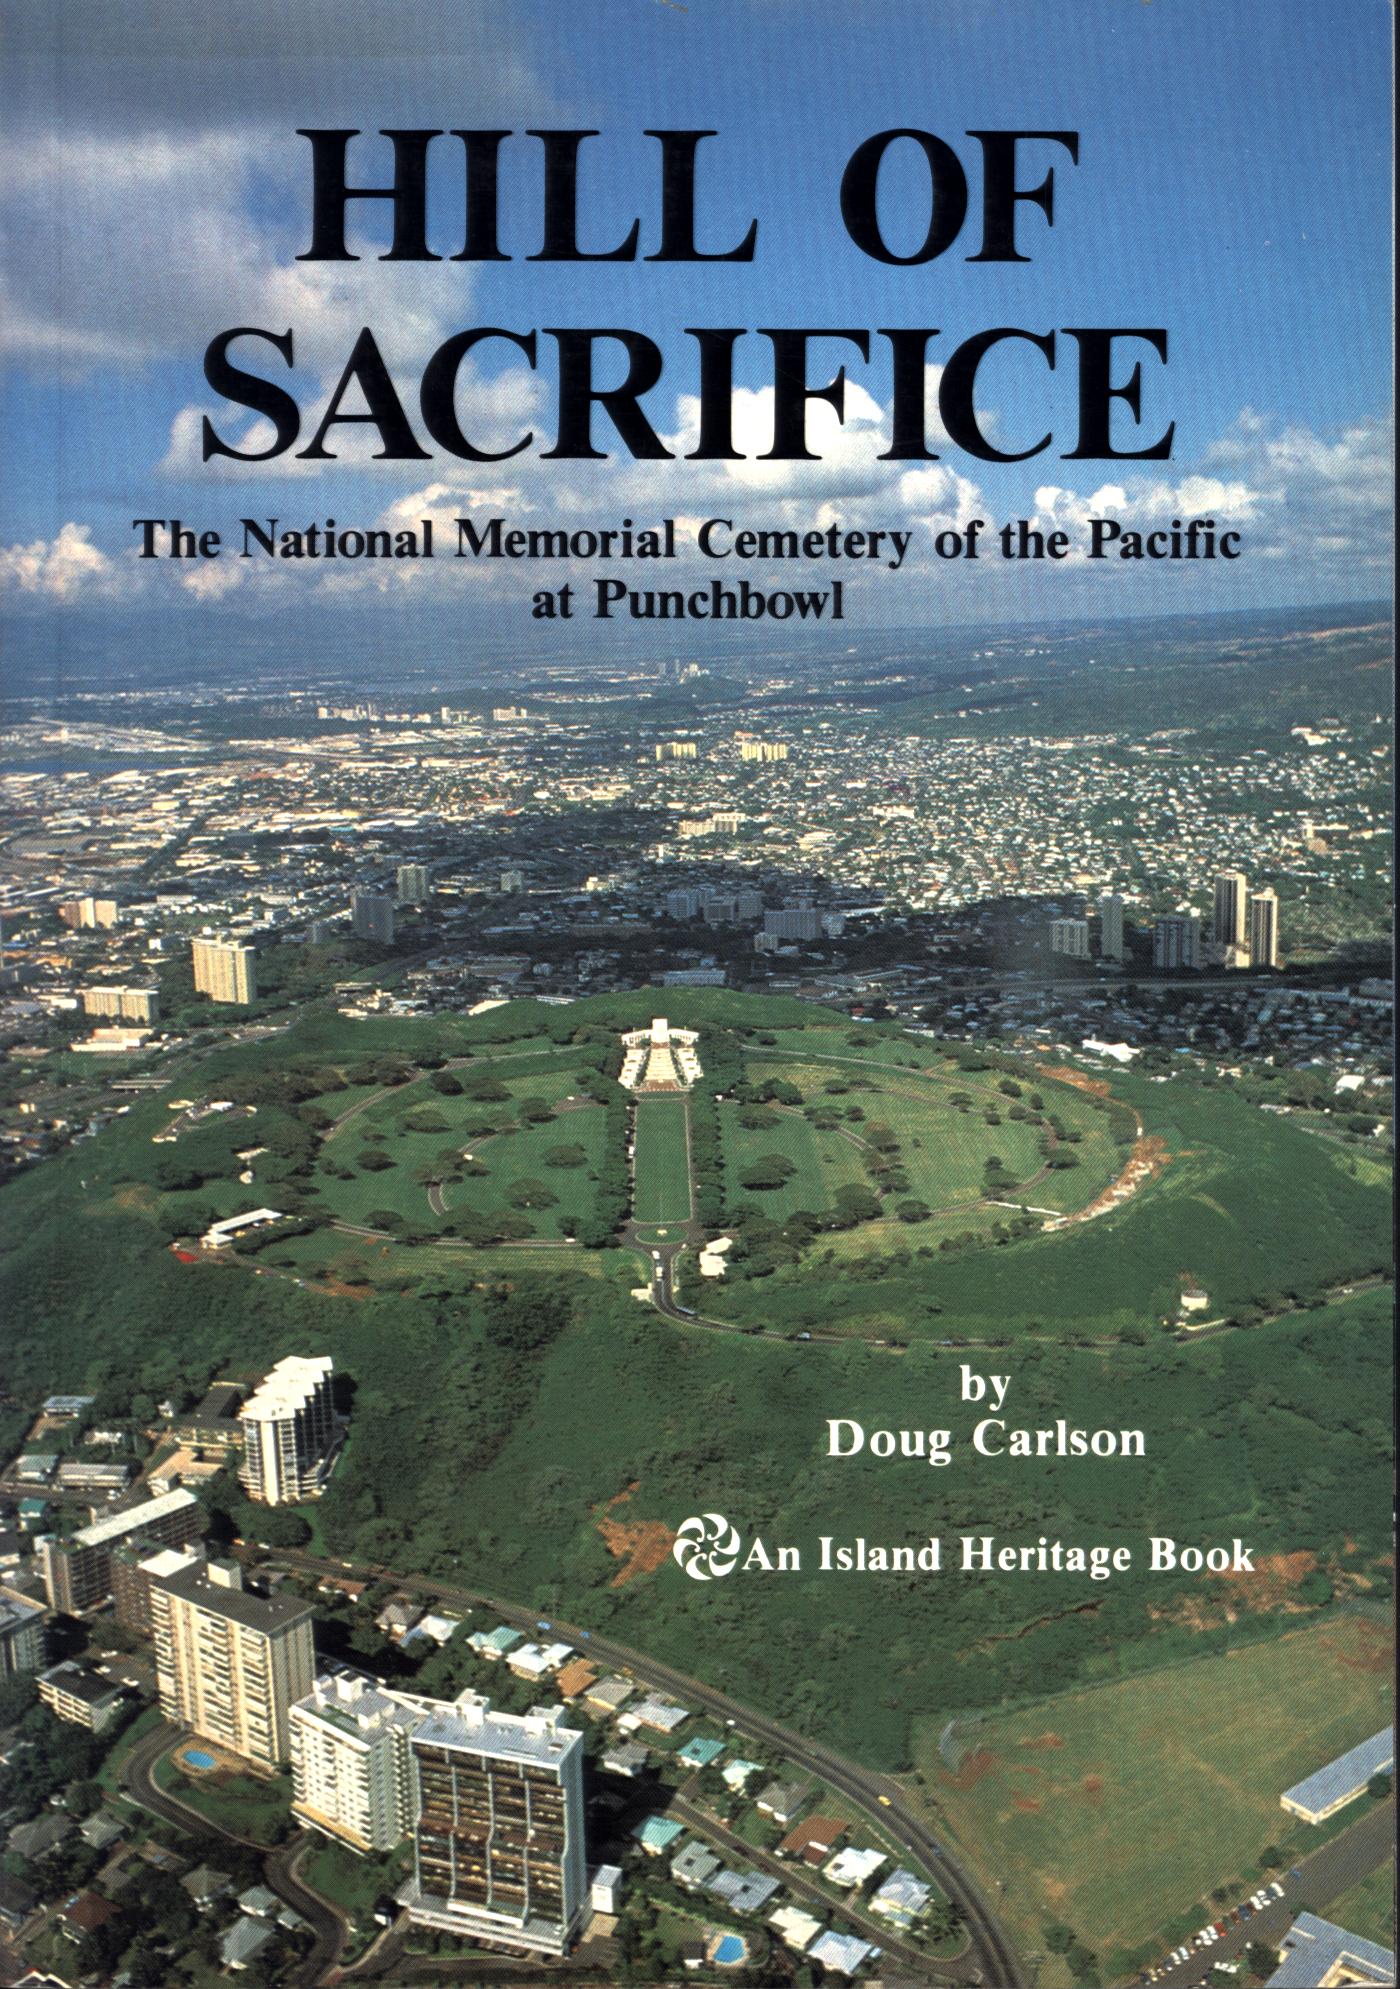 HILL OF SACRIFICE: the National Memorial Cemetery of the Pacific at Punchbowl.